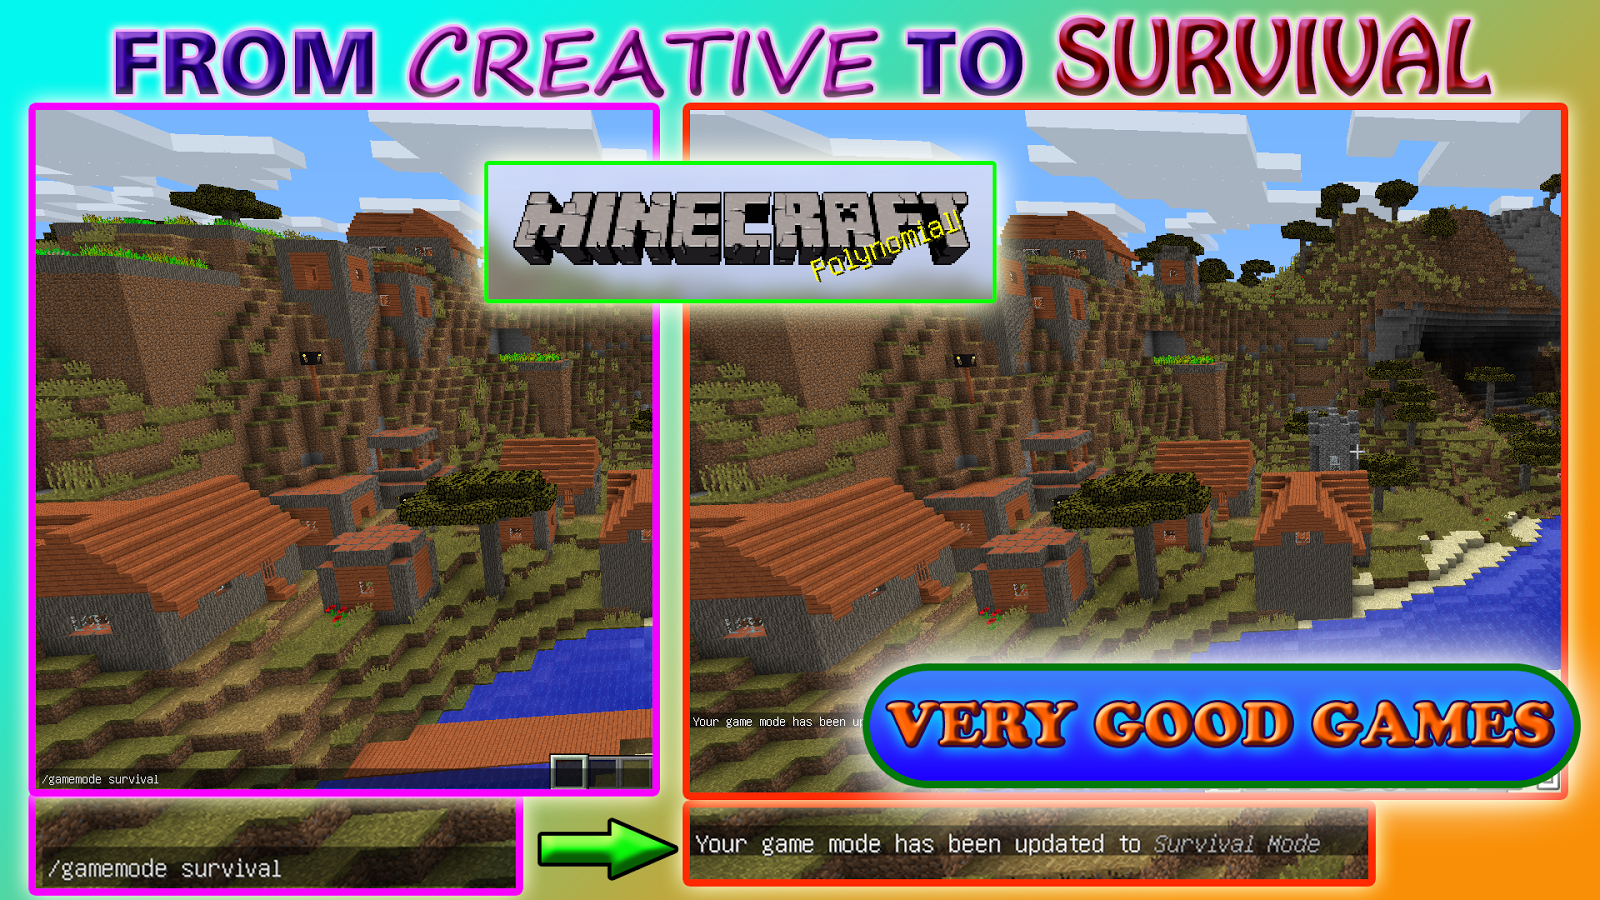 Minecraft tutorial about jumping into the Survival mode from Creative by a chat command